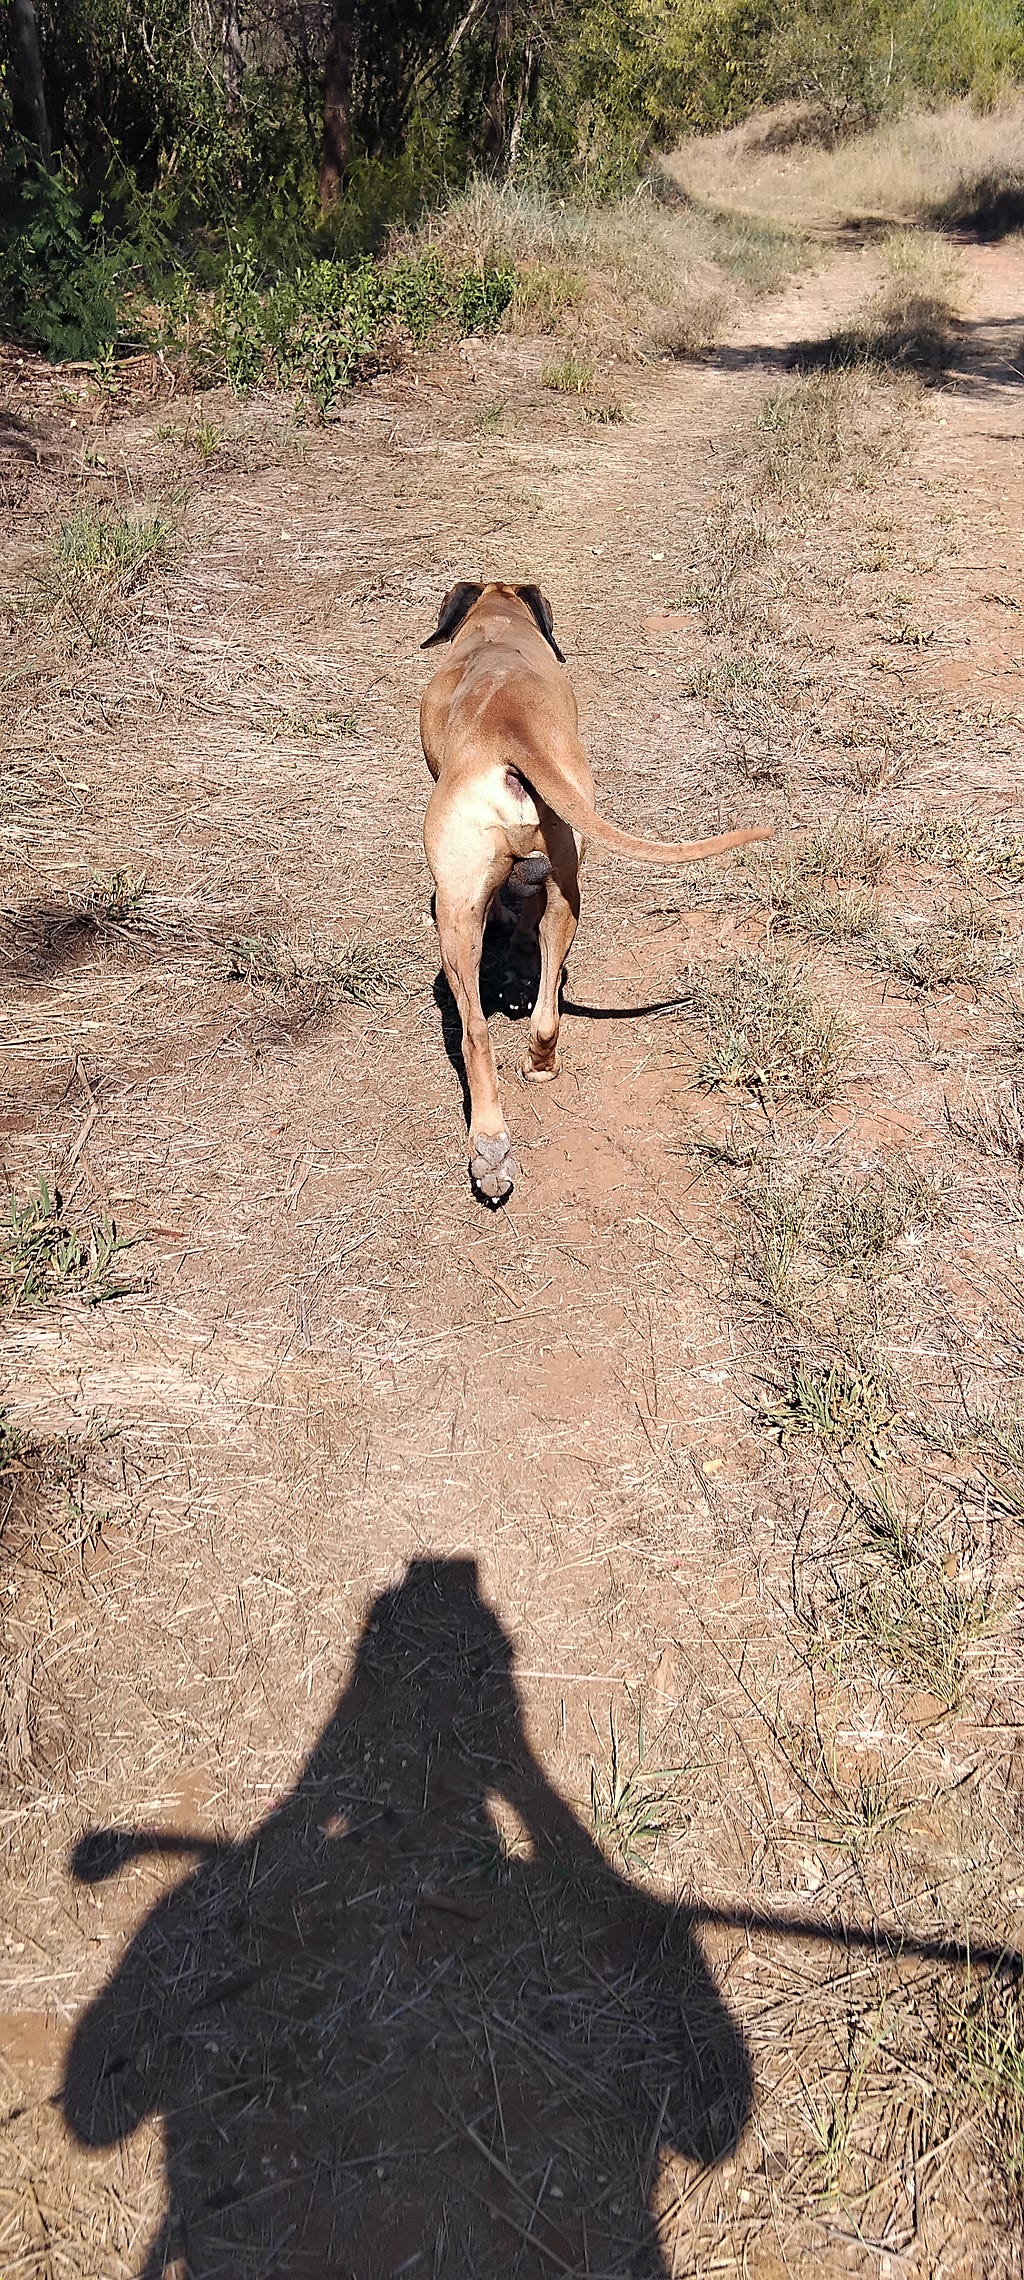 An adult male Rhodesian Ridgeback dog taking a walk in nature with the author’s shadow looking on